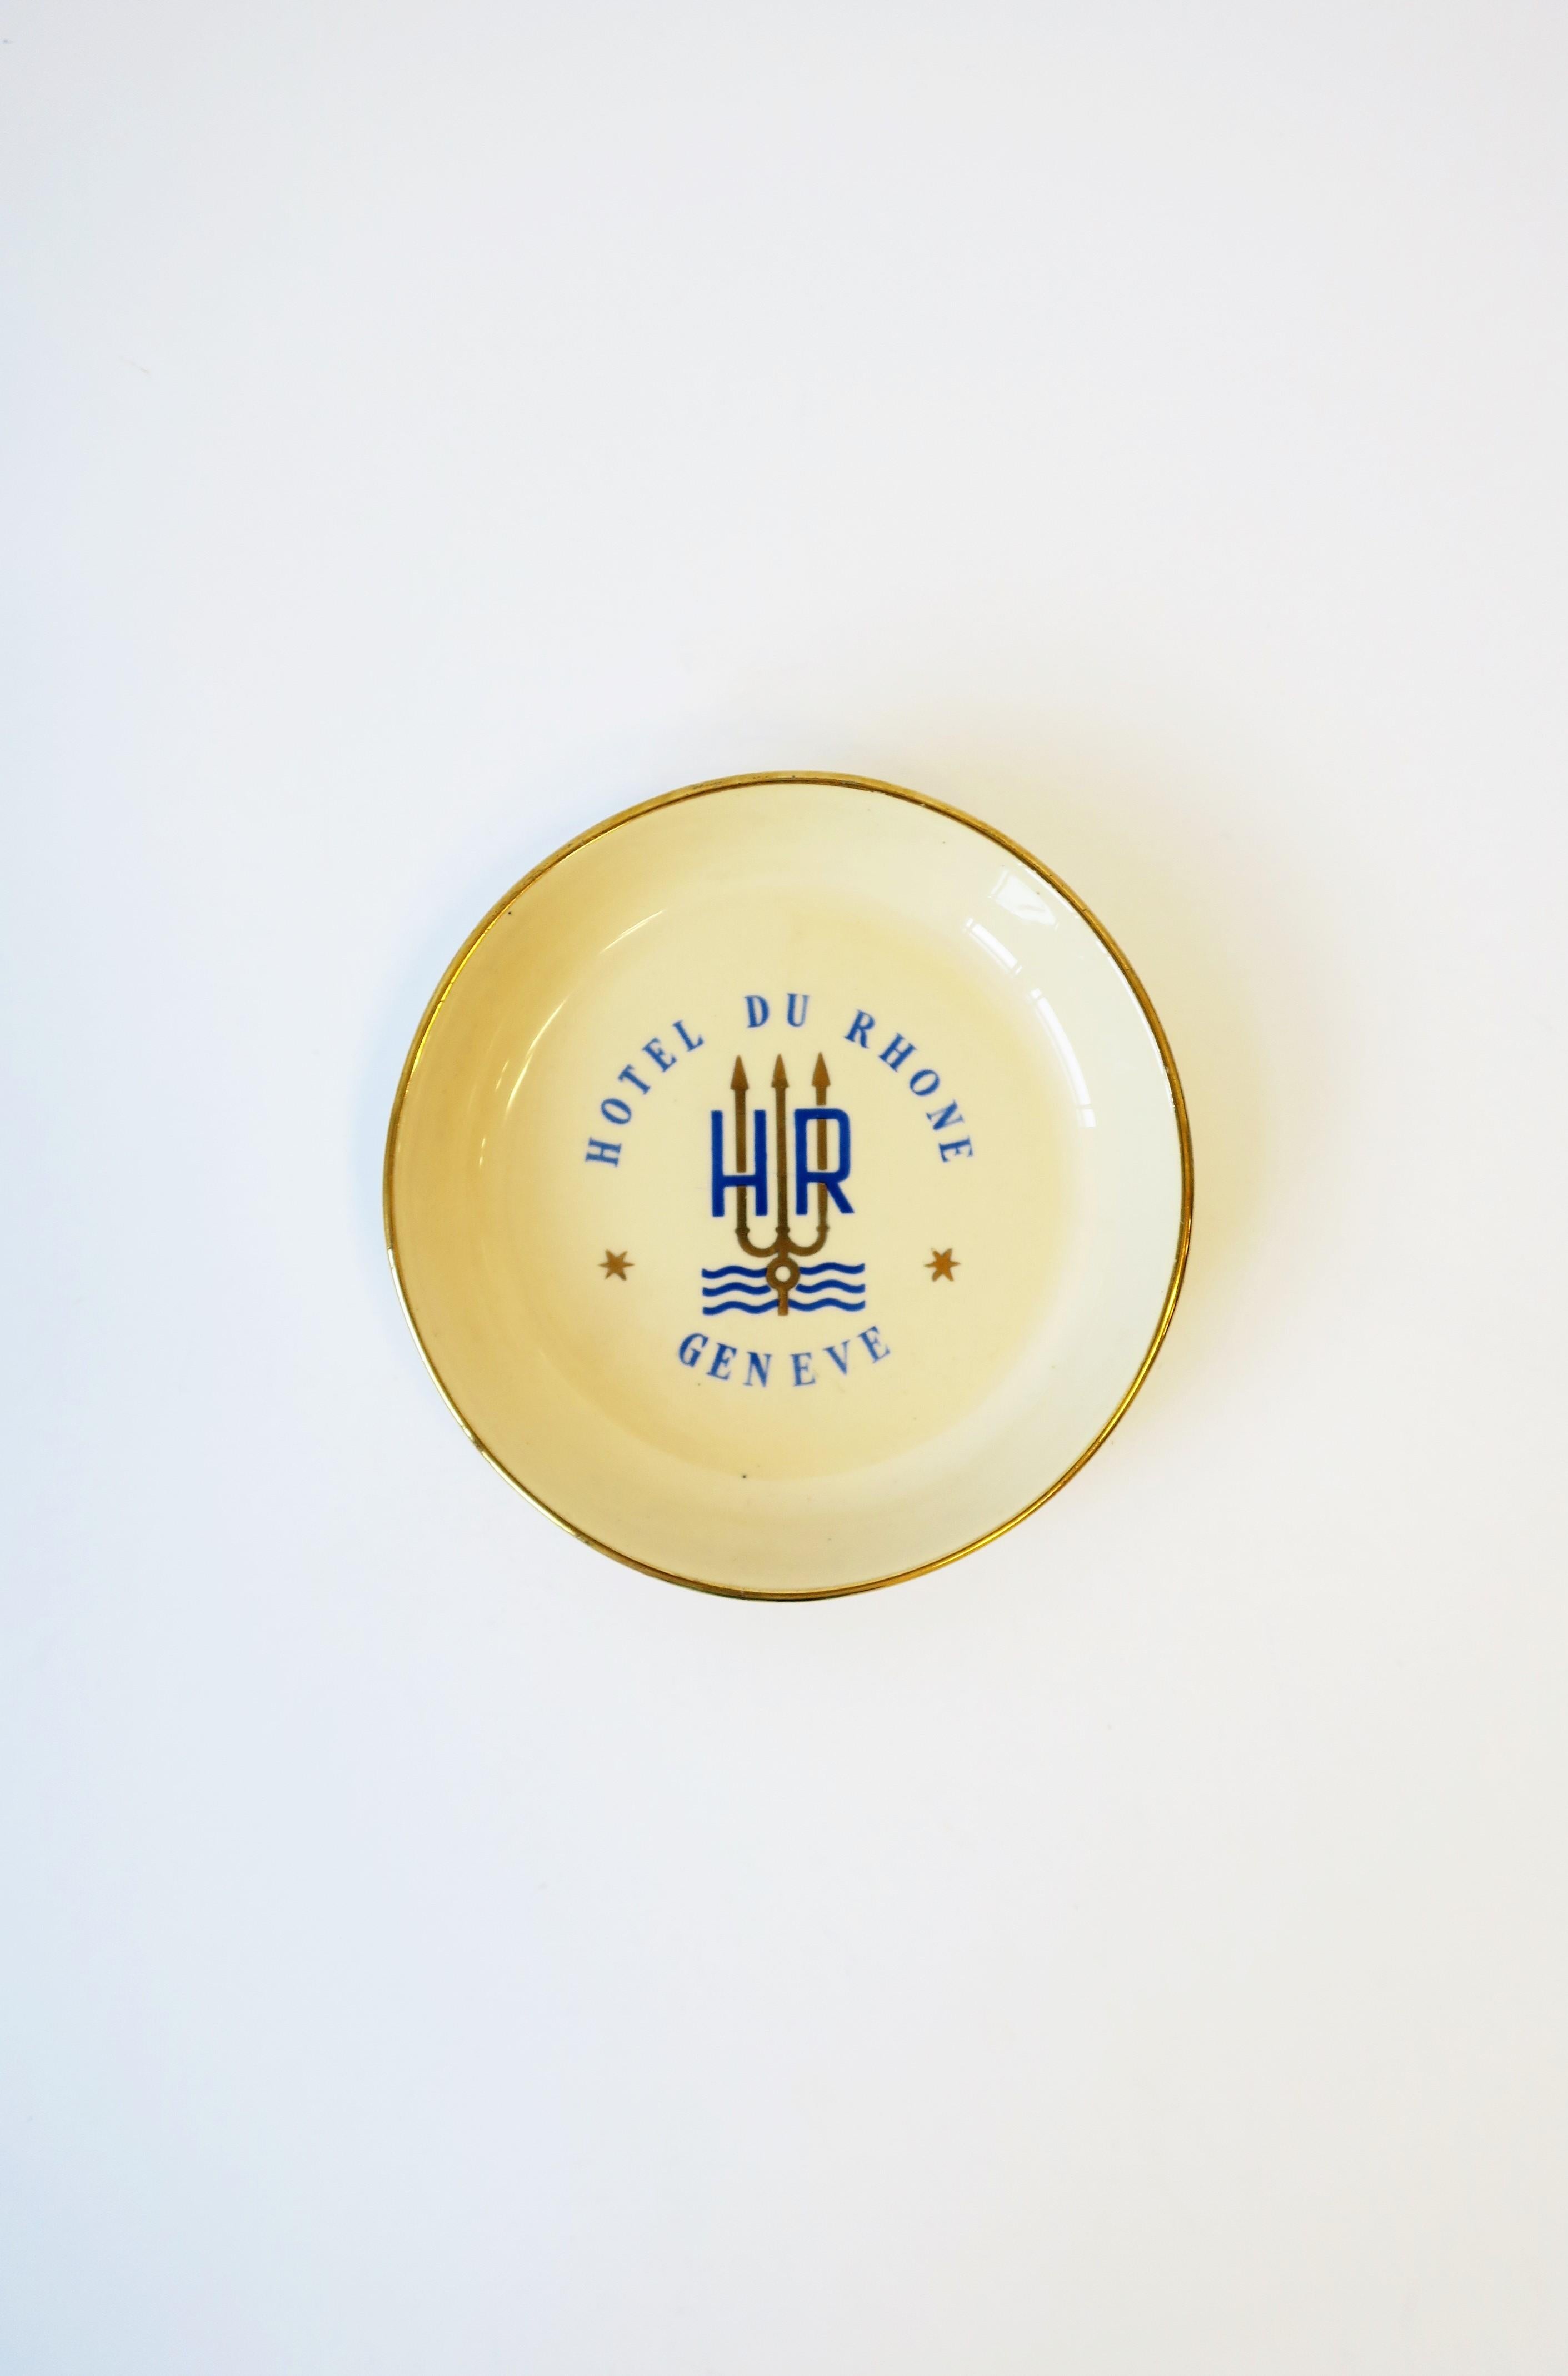 A small round European blue and gold porcelain jewelry dish from Swiss luxury hotel brand 